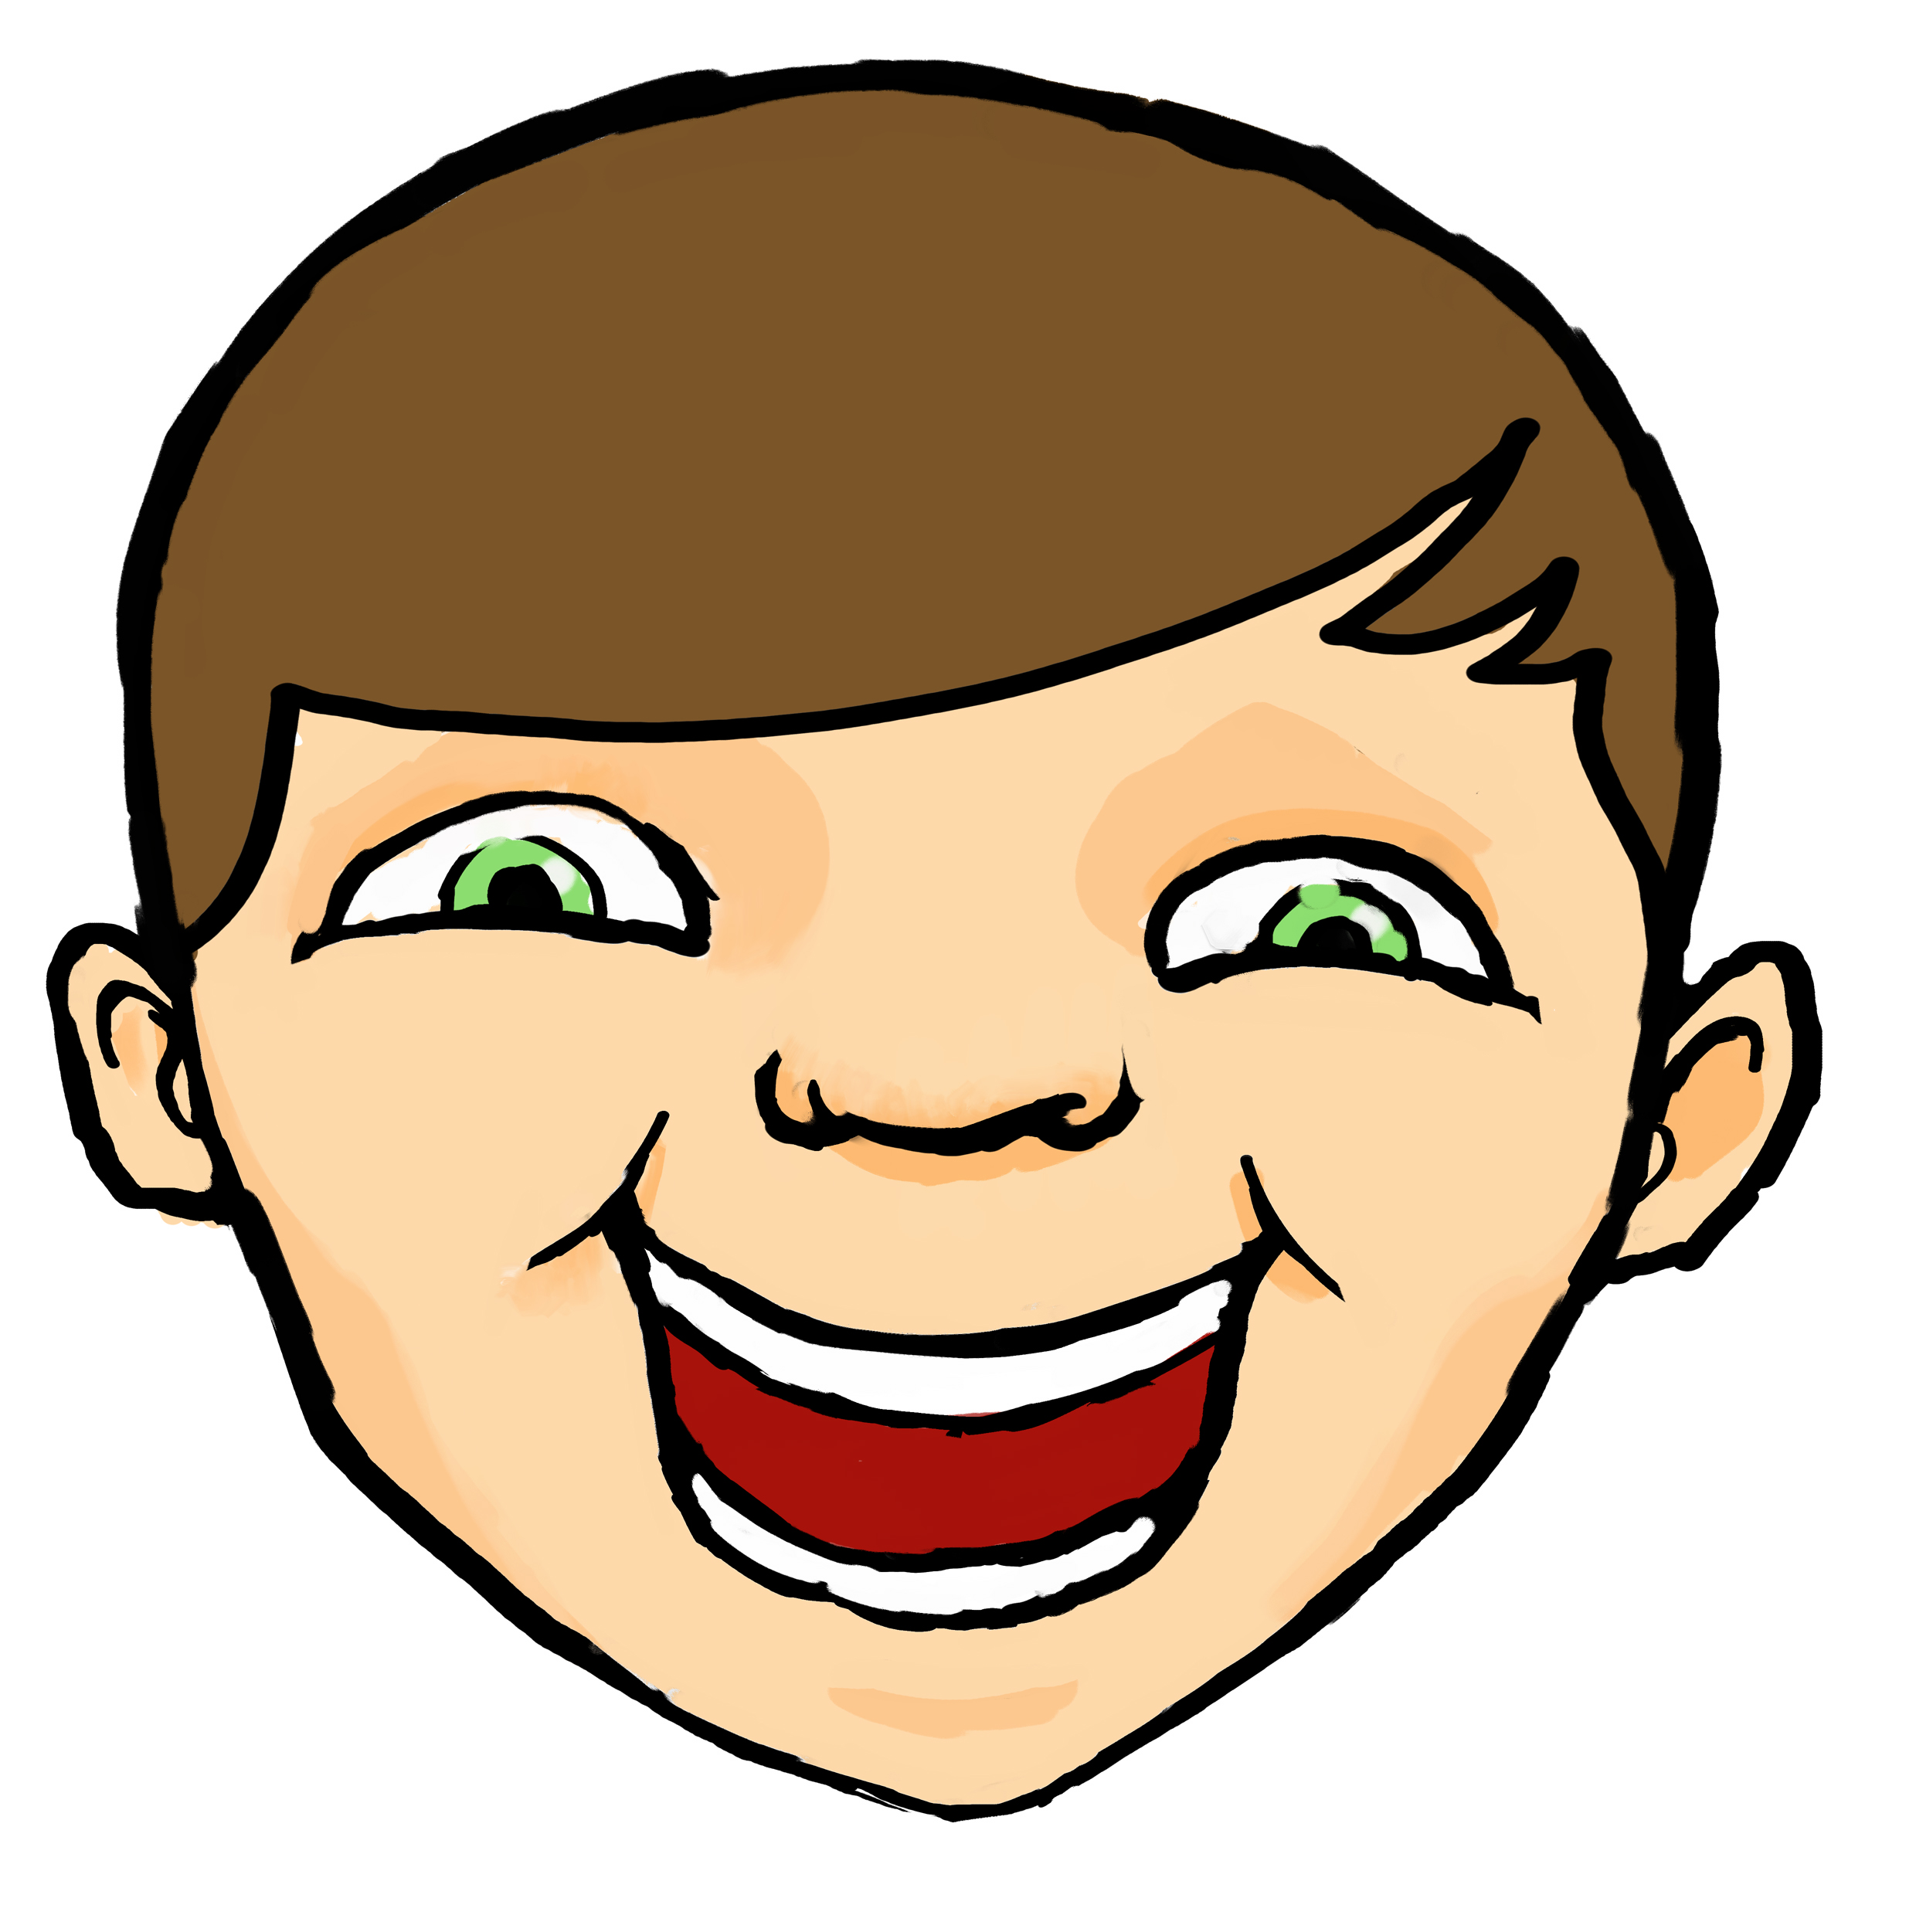 Clipart Laughing - Cliparts.co